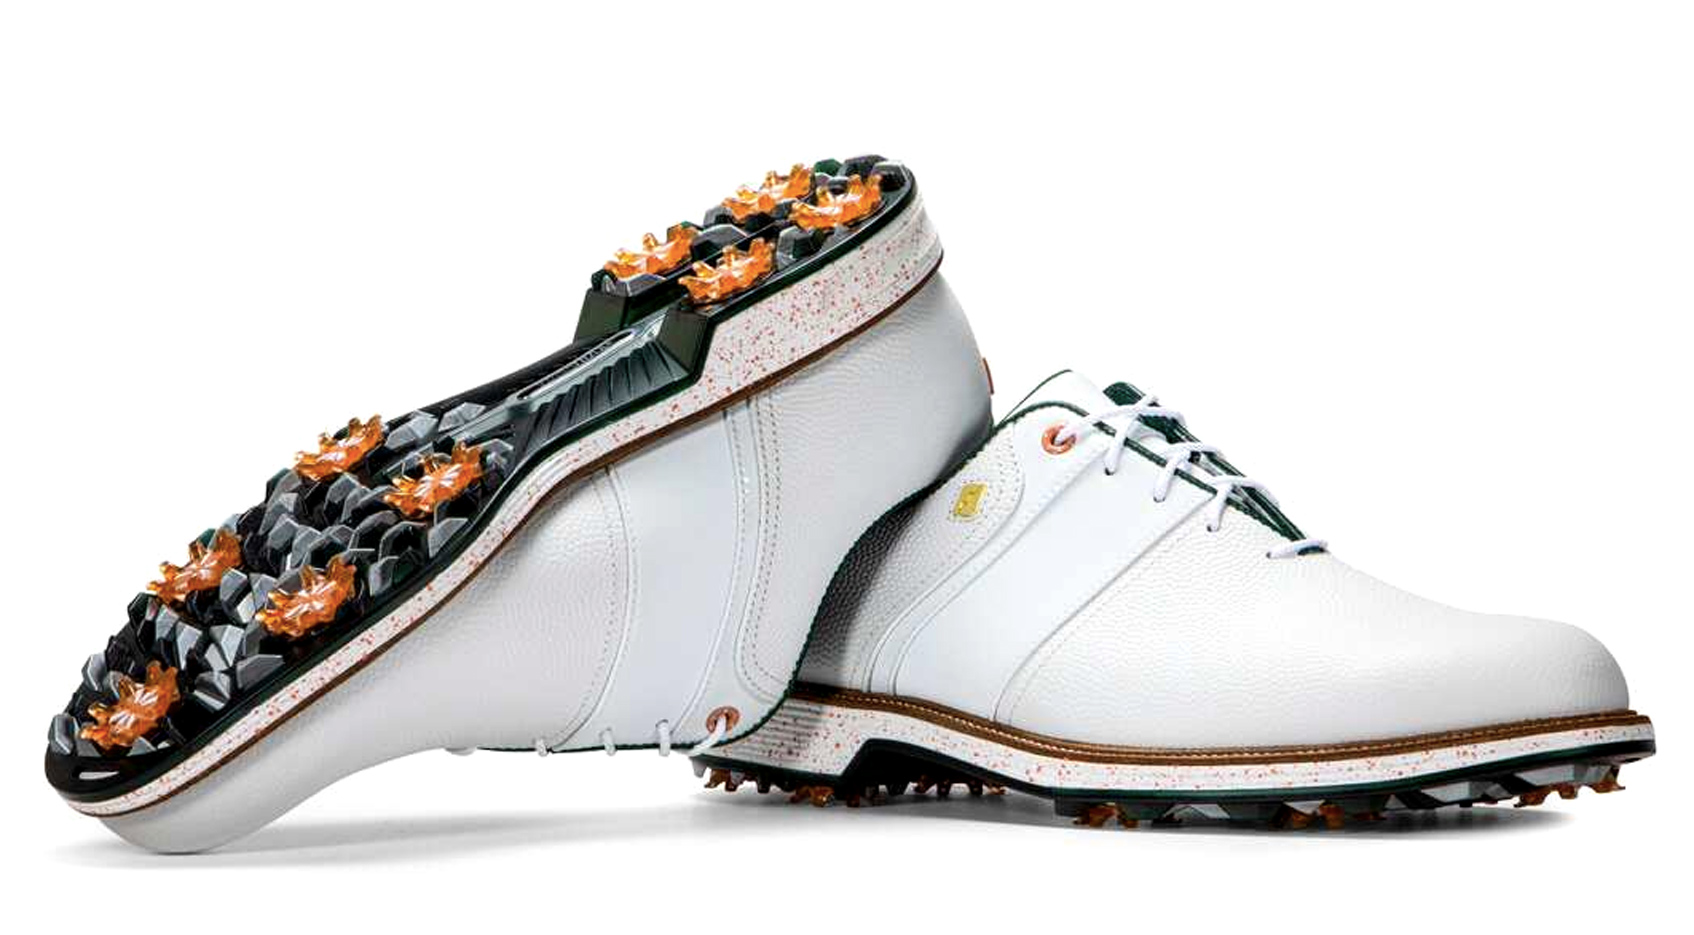 Custom gear for the 2021 Masters